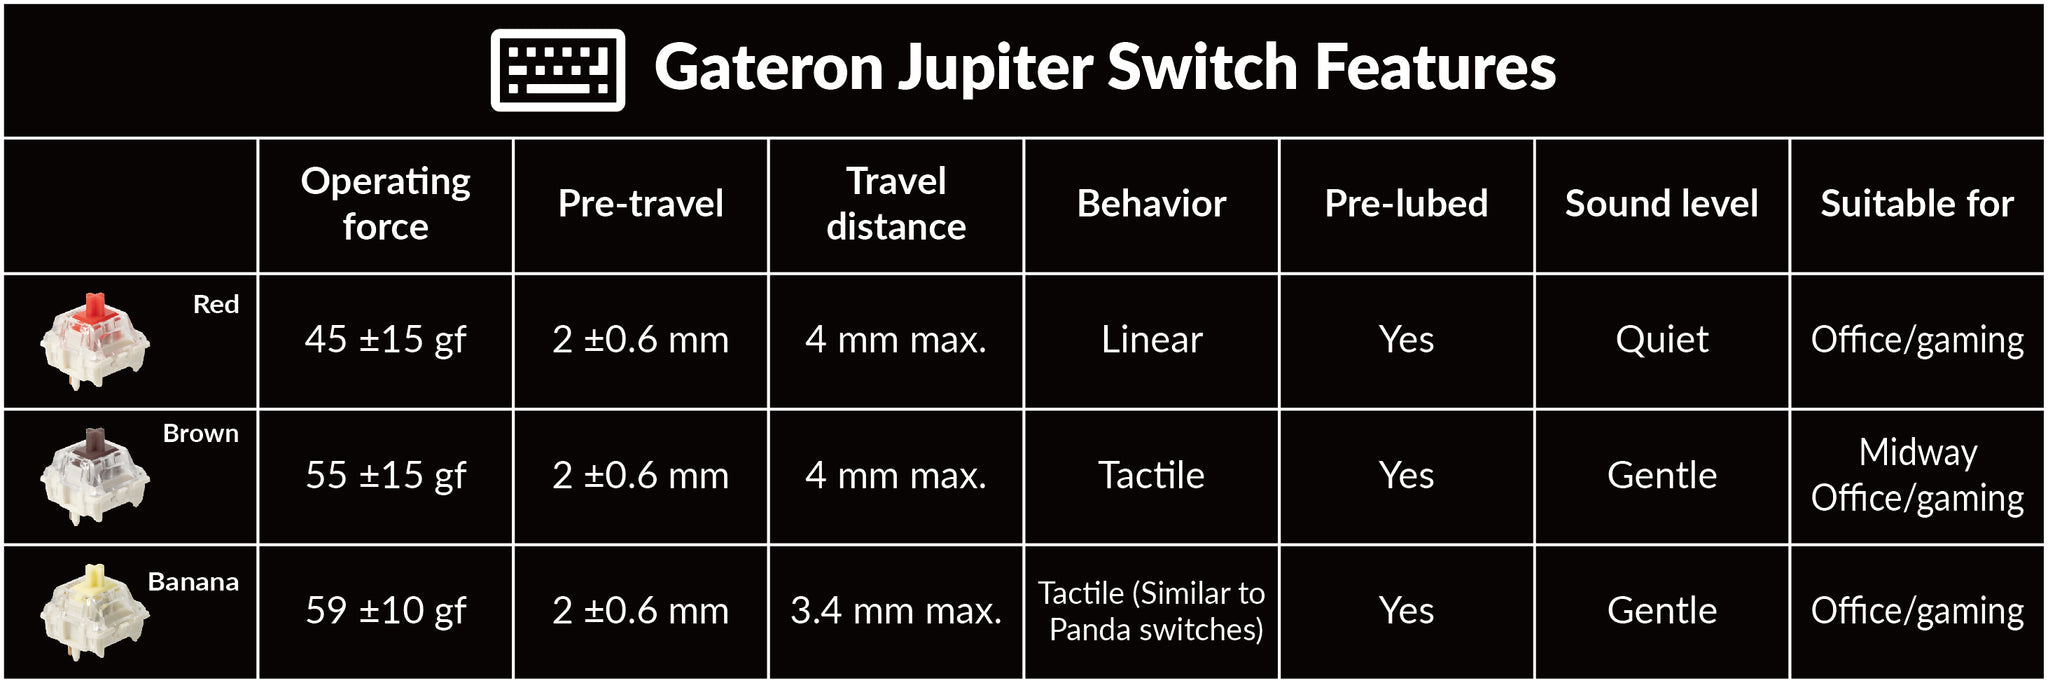 Gateron Jupiter Switch Features of Keychron Q0 Max QMK Custom Number Pad